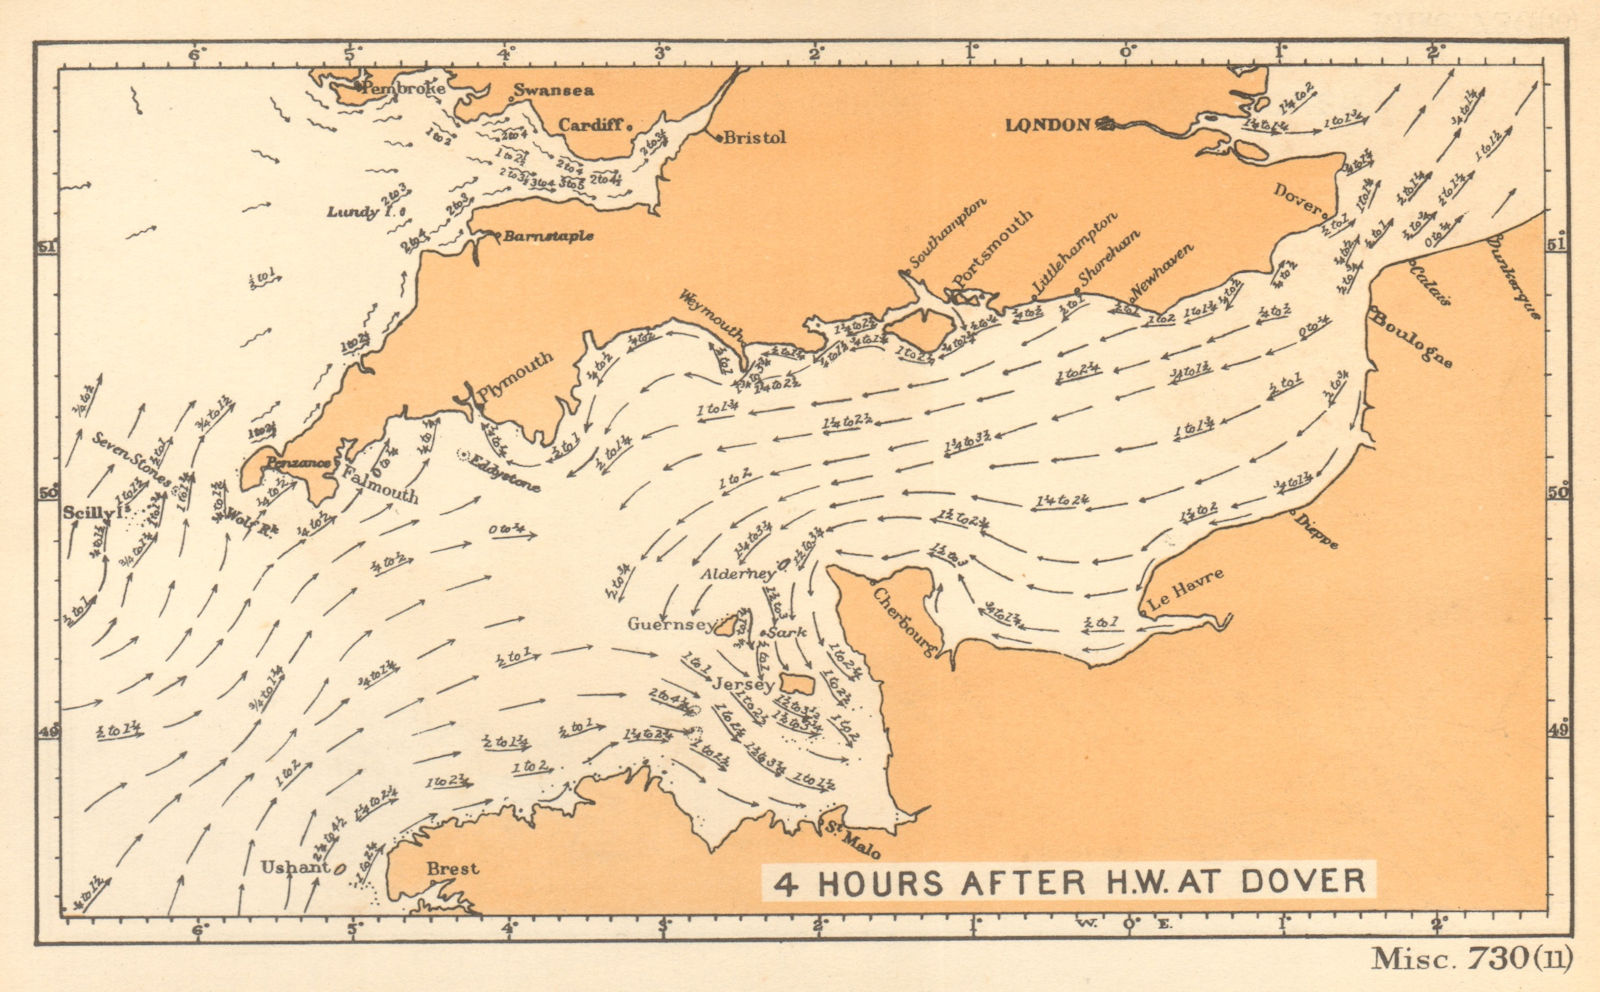 English Channel currents 4 hours after high water at Dover. ADMIRALTY 1943 map